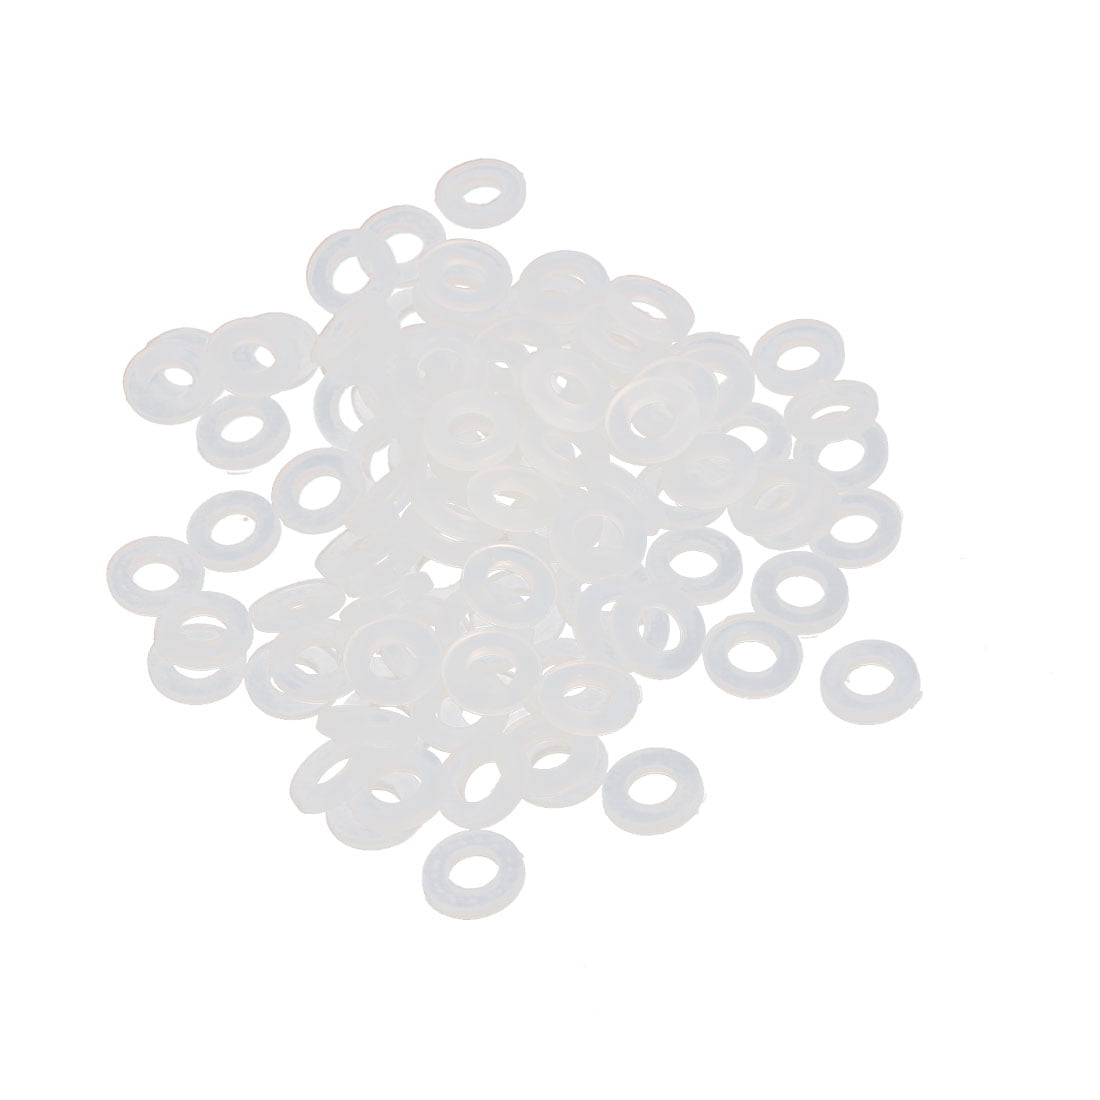 uxcell Nylon Flat Insulating Washers Gasket 8mm x 3mm x 1mm 100pcs Clear